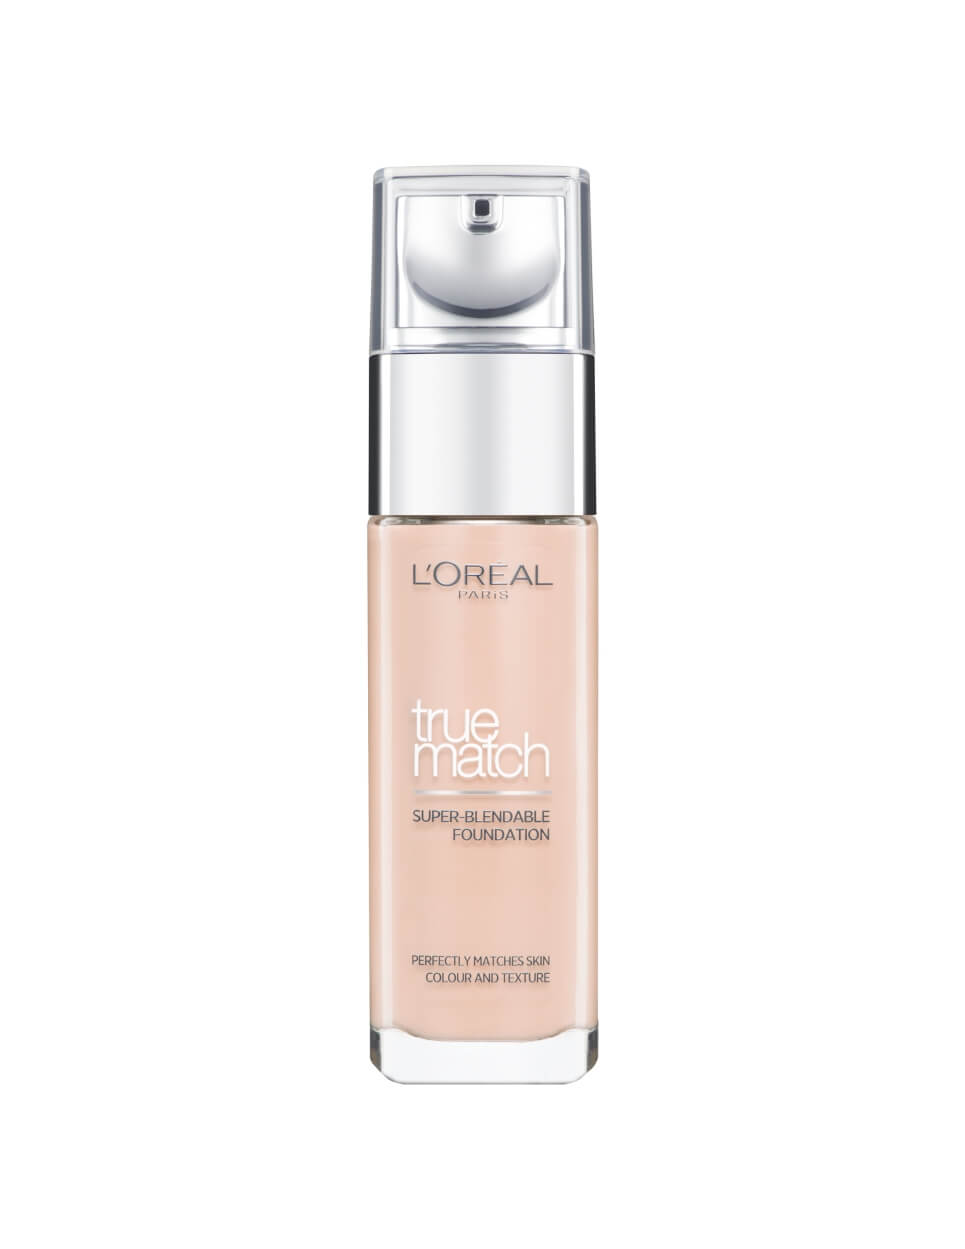 LOreal True Match Foundation - 8 Best Foundations for Dry Skin Available in India with Review & Price